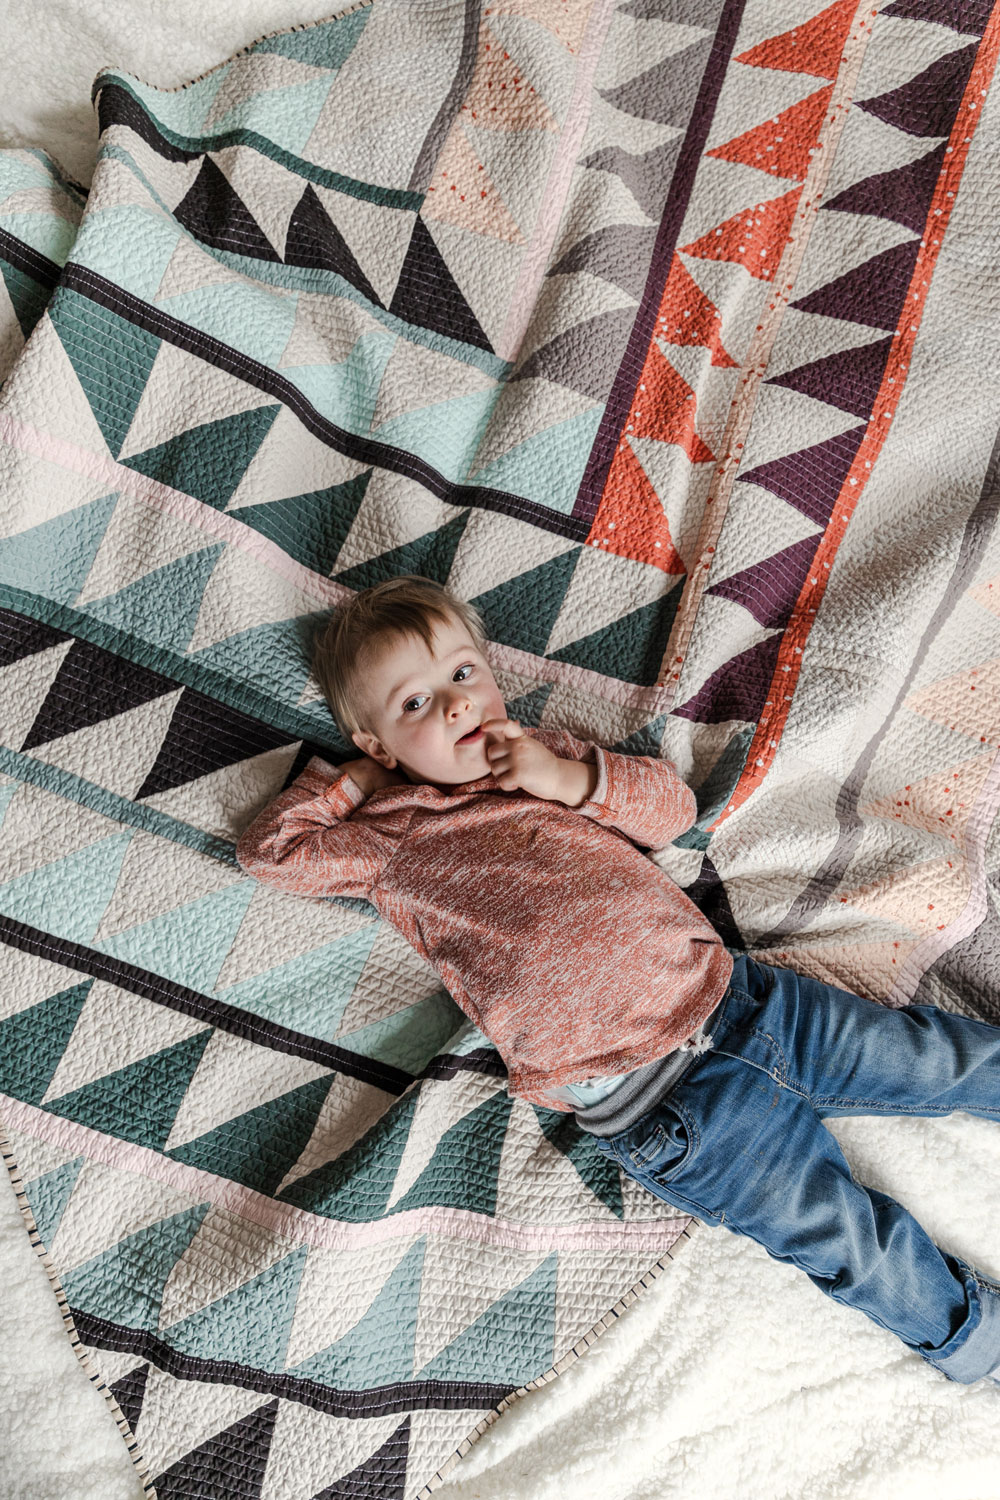 Join a fun sew along! It is easy to participate – all you need is the Gather quilt pattern so we make this quilt together! suzyquilts.com #quiltpattern #modernquilt